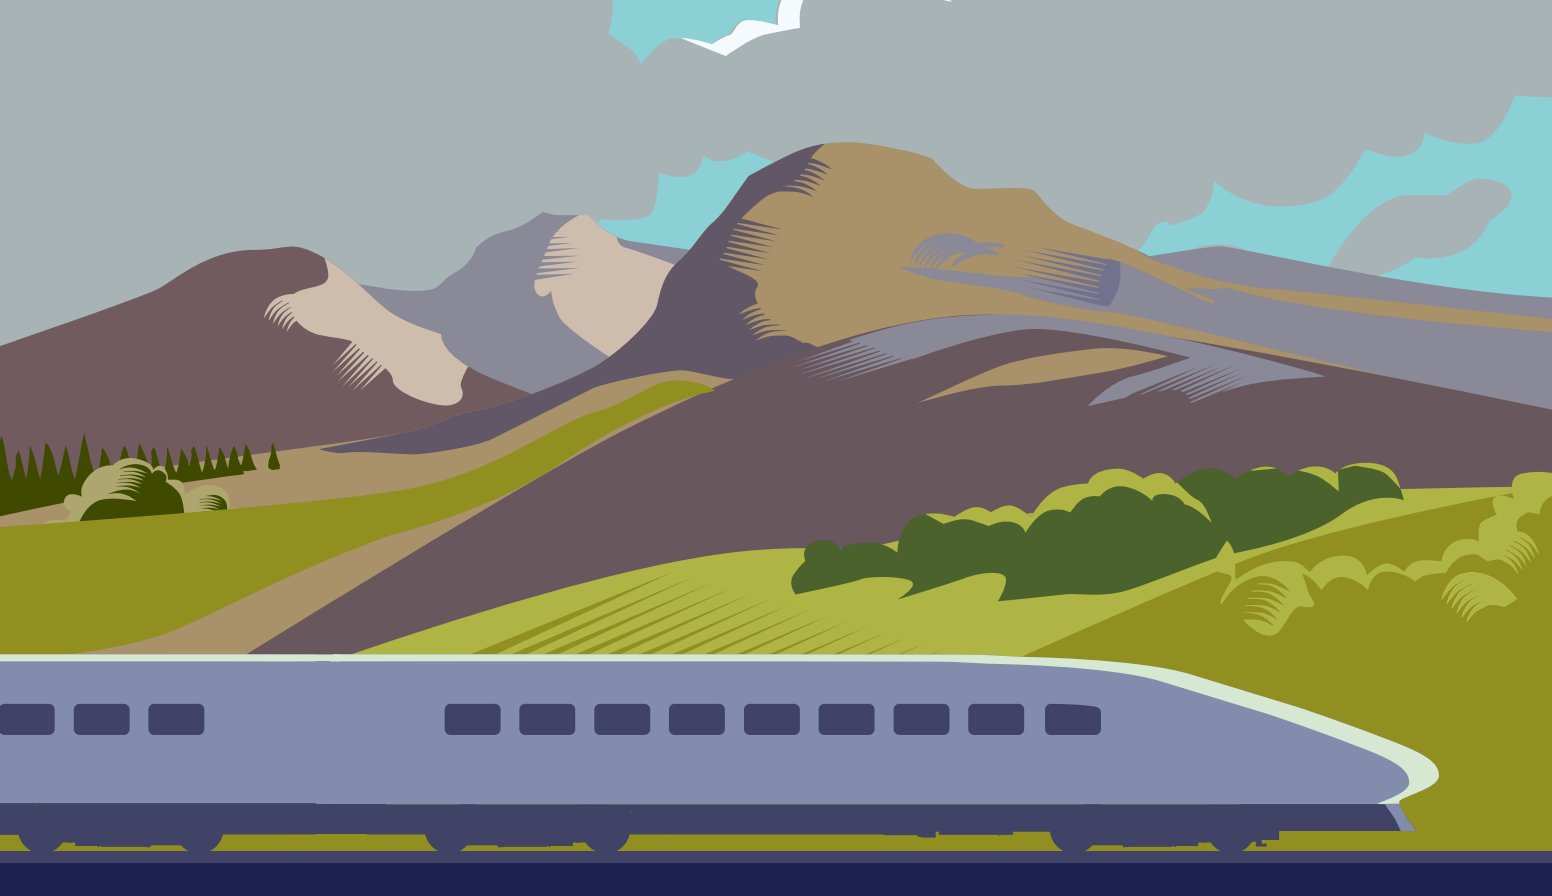 Report makes net zero carbon case for high speed rail connection to Scotland